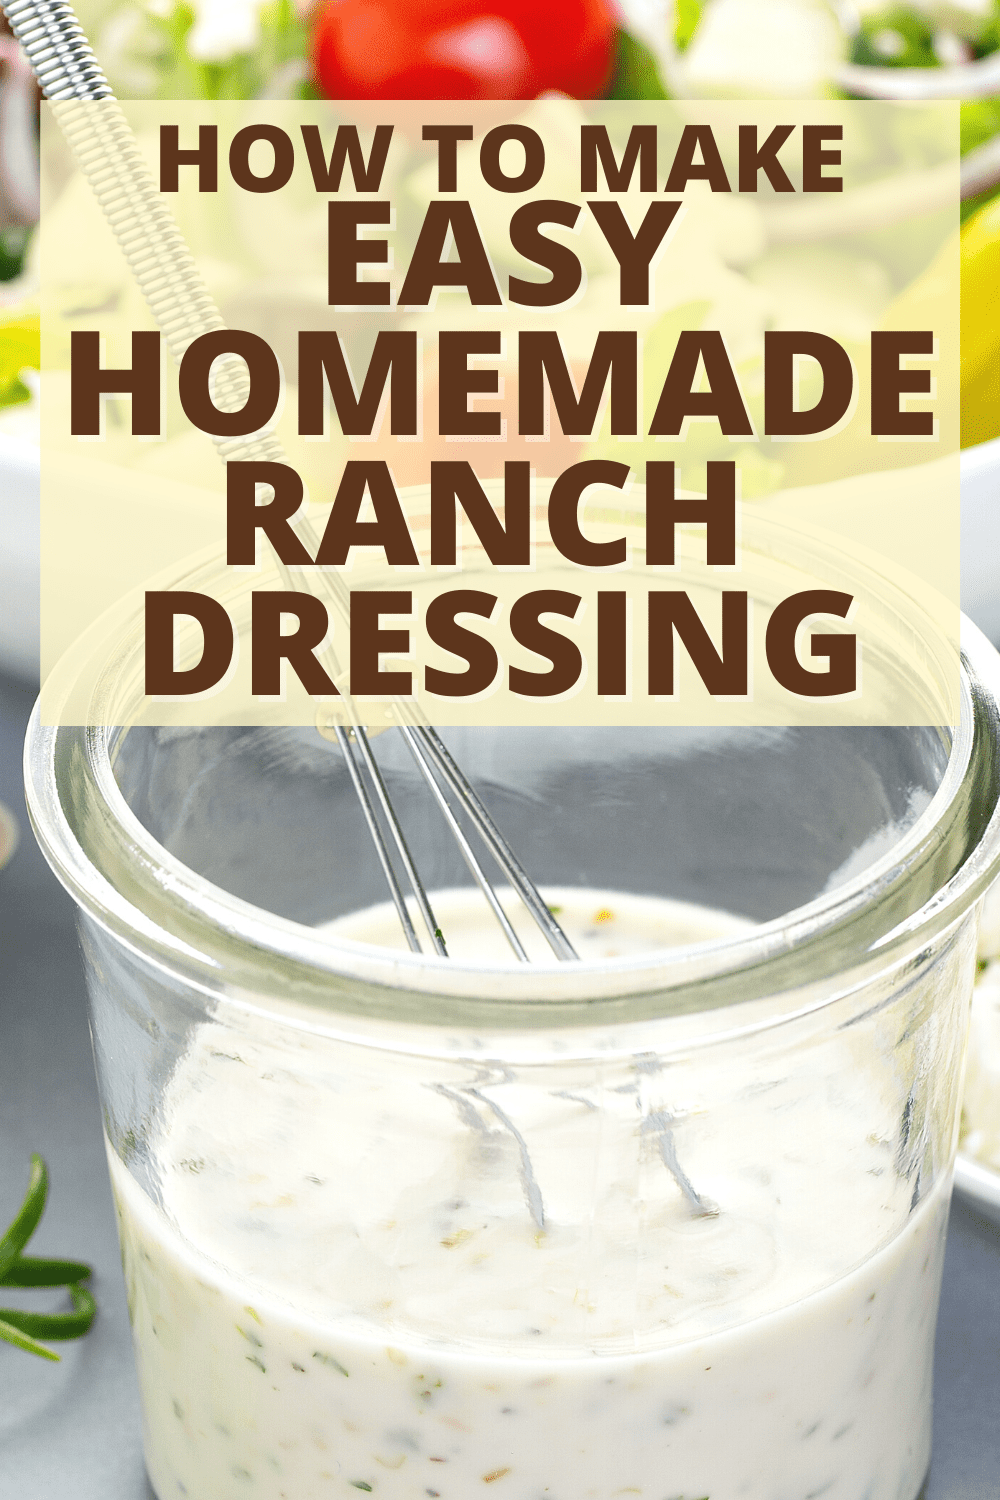 HOMEMADE RANCH DRESSING MIX RECIPE How To Make Ranch Salad Dressing ranch dressing in a jar sitting on a table